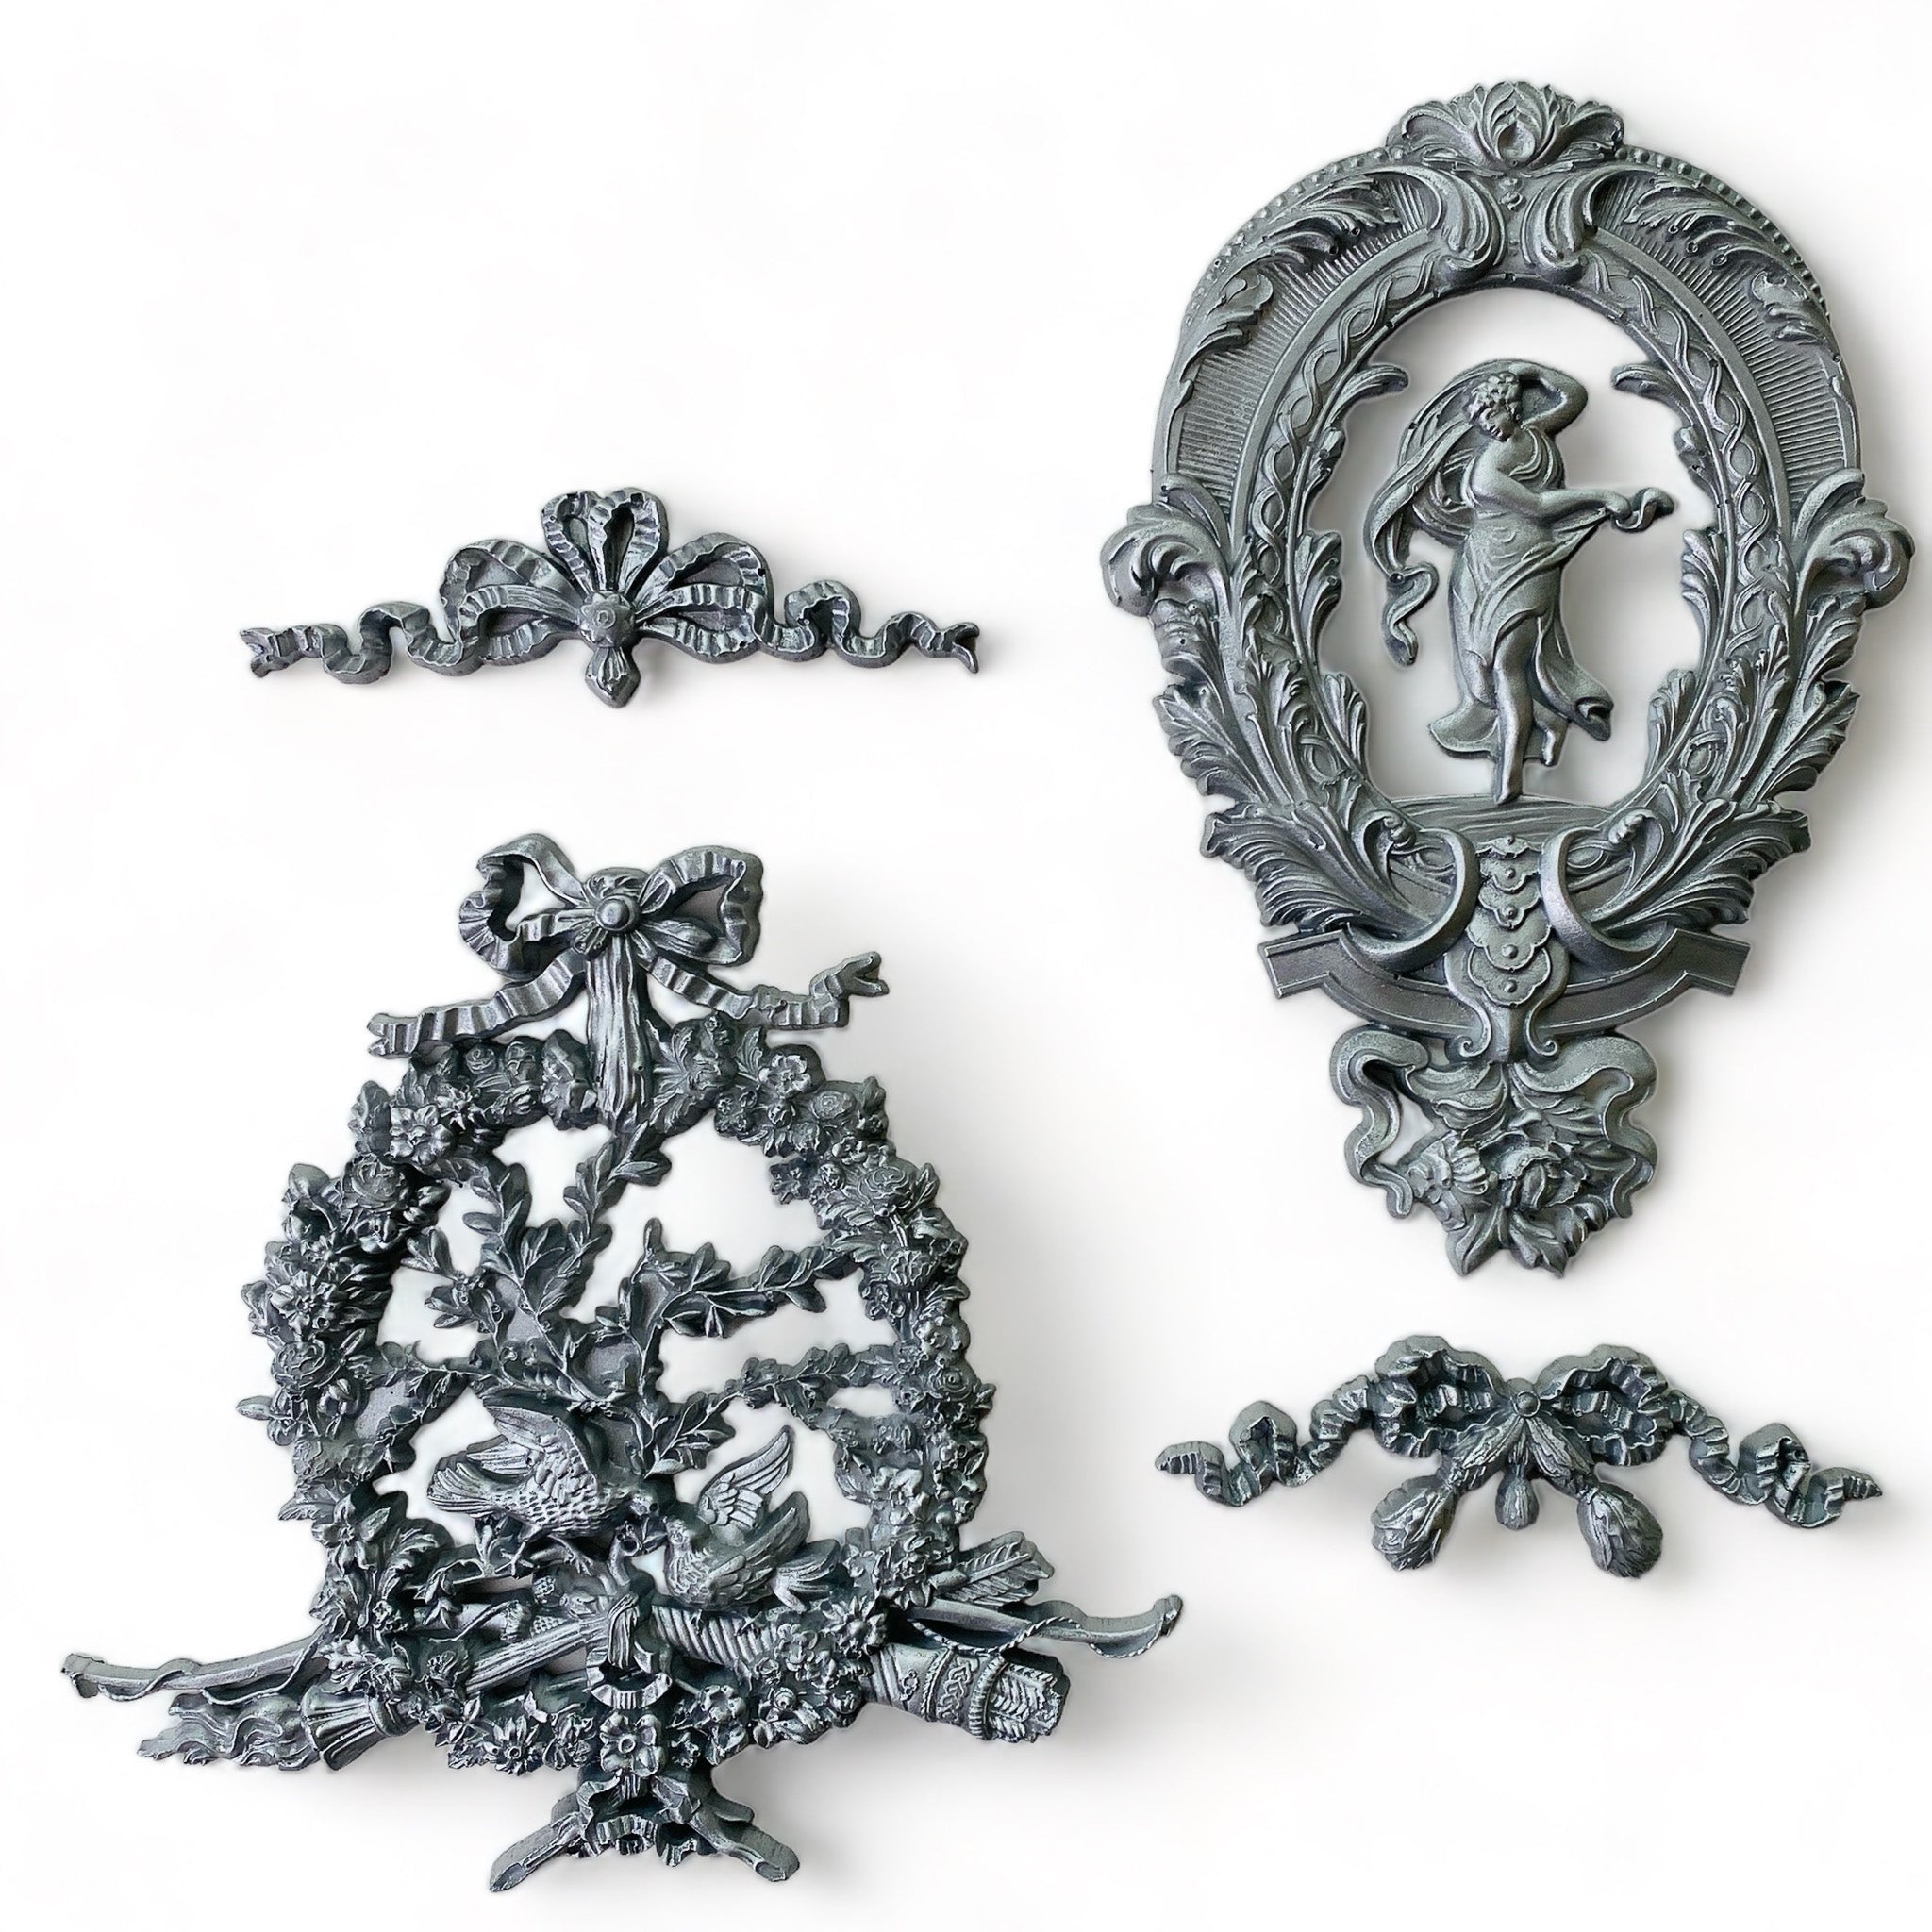 Silver colored silicone mold castings that feature 2 bows, an ornate oval medallion and an ornate wreath are against a white background.